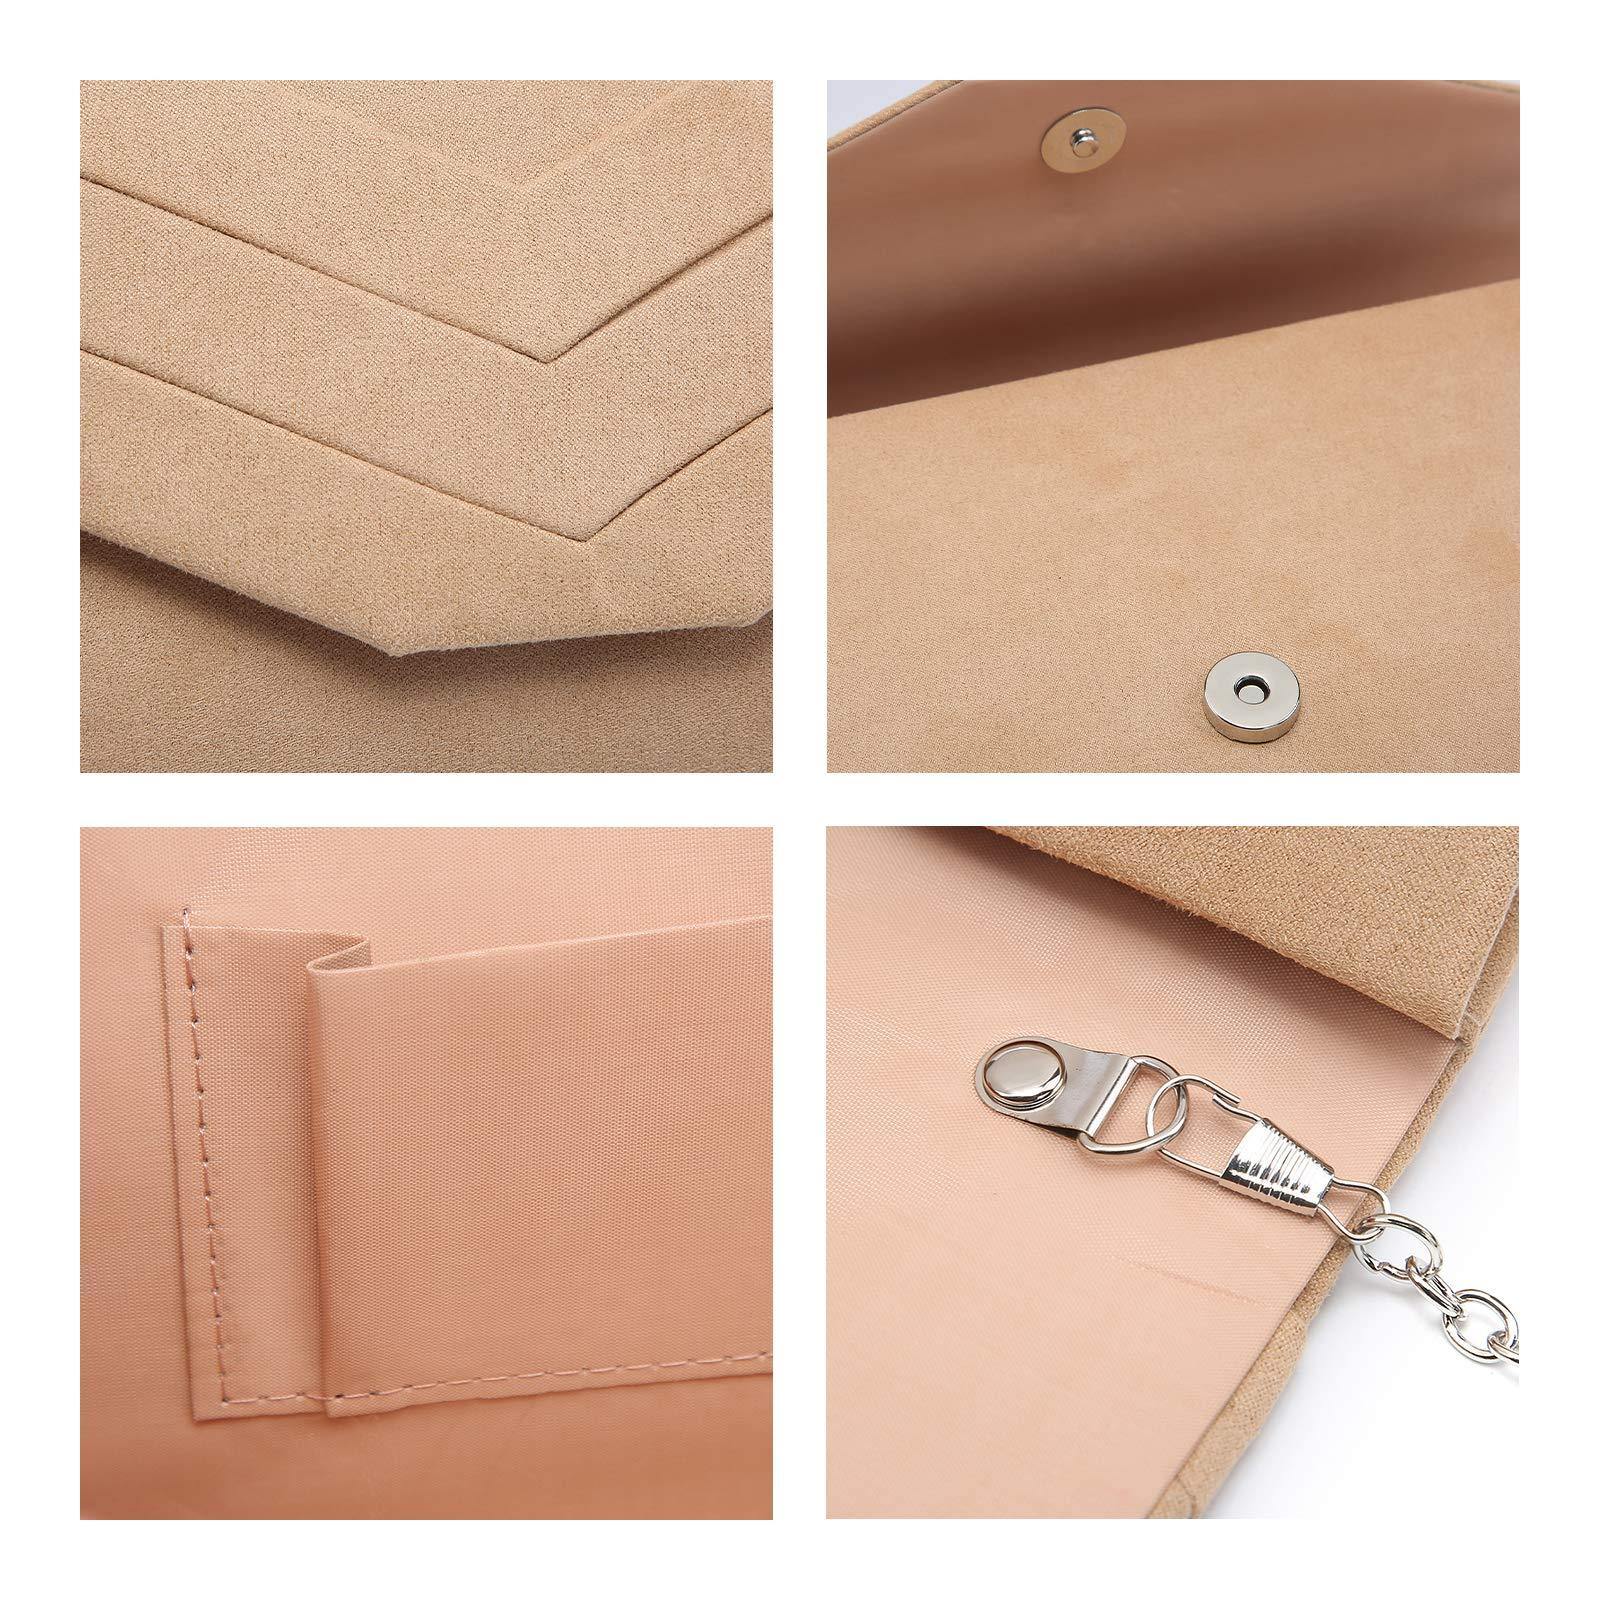 TINDTOP Clutch Purses for Women, Formal Evening Clutch Bags Shoulder Envelope Party Handbags Wedding Cocktail Prom Clutches